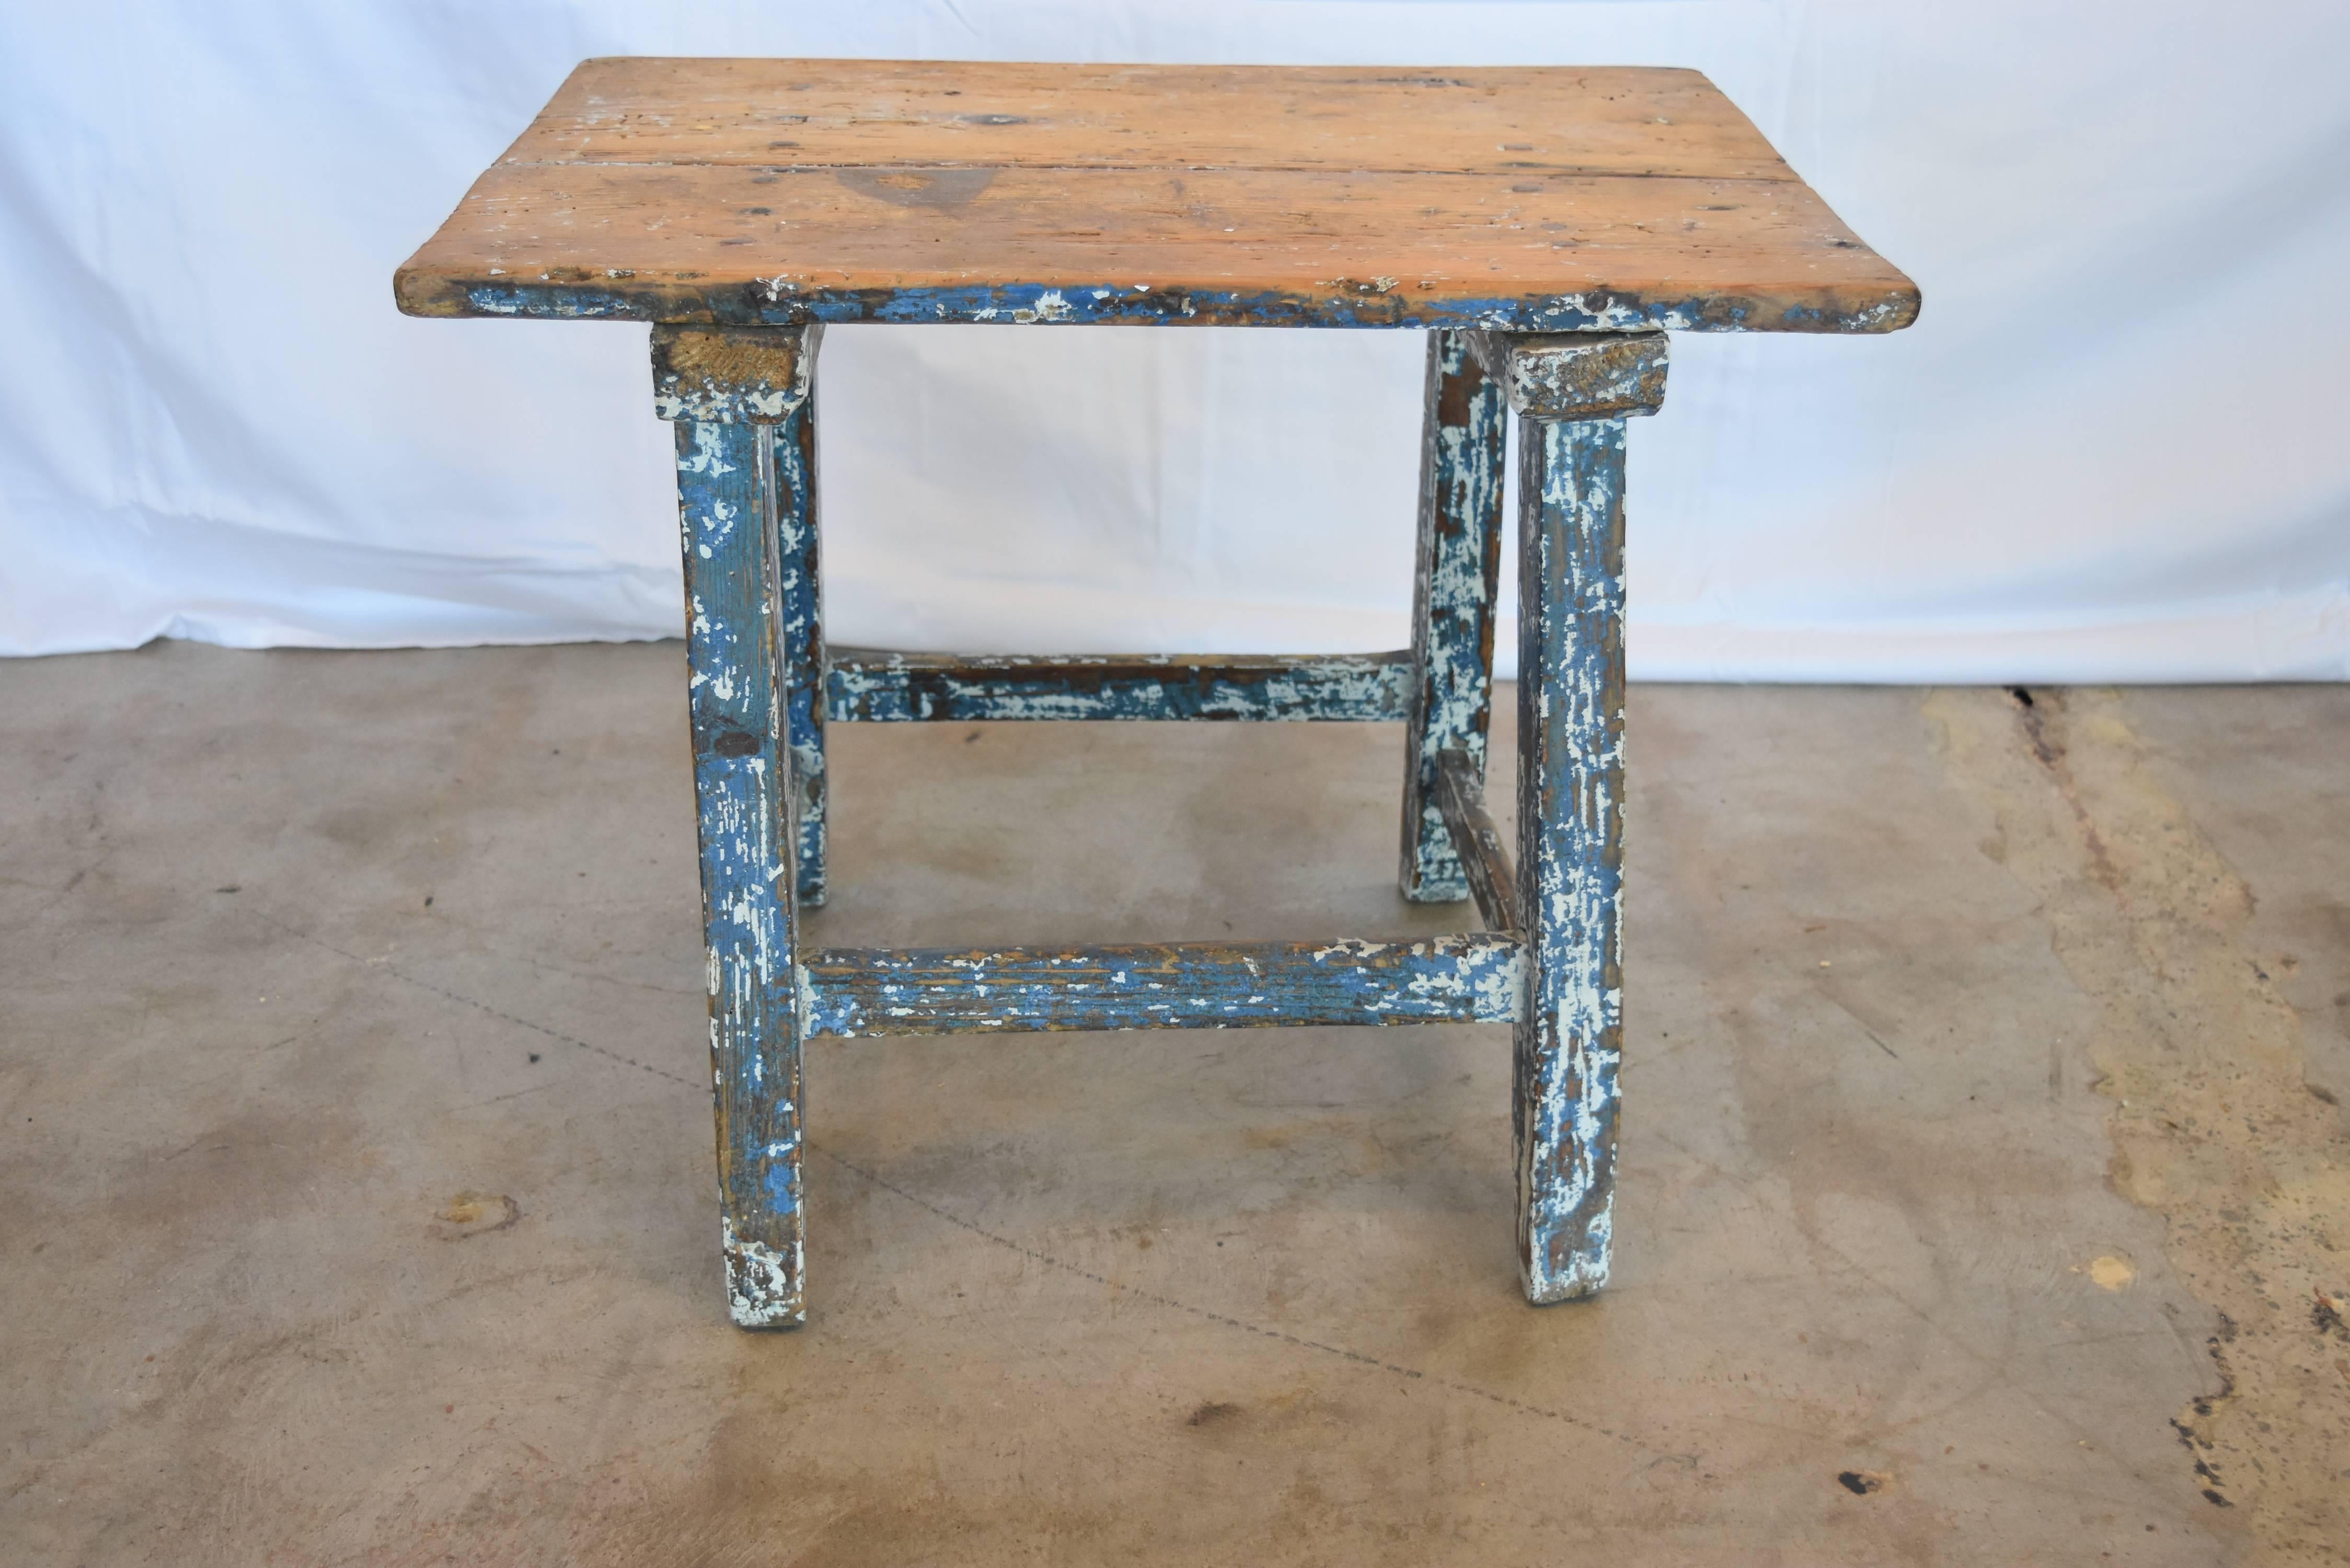 This is an early 20th century Childs table from Spain which can serve as a side table or stool as well. Much of the original paint is still intact which makes it more desirable indeed. It's very sturdy, made out of pine and the photos are a good